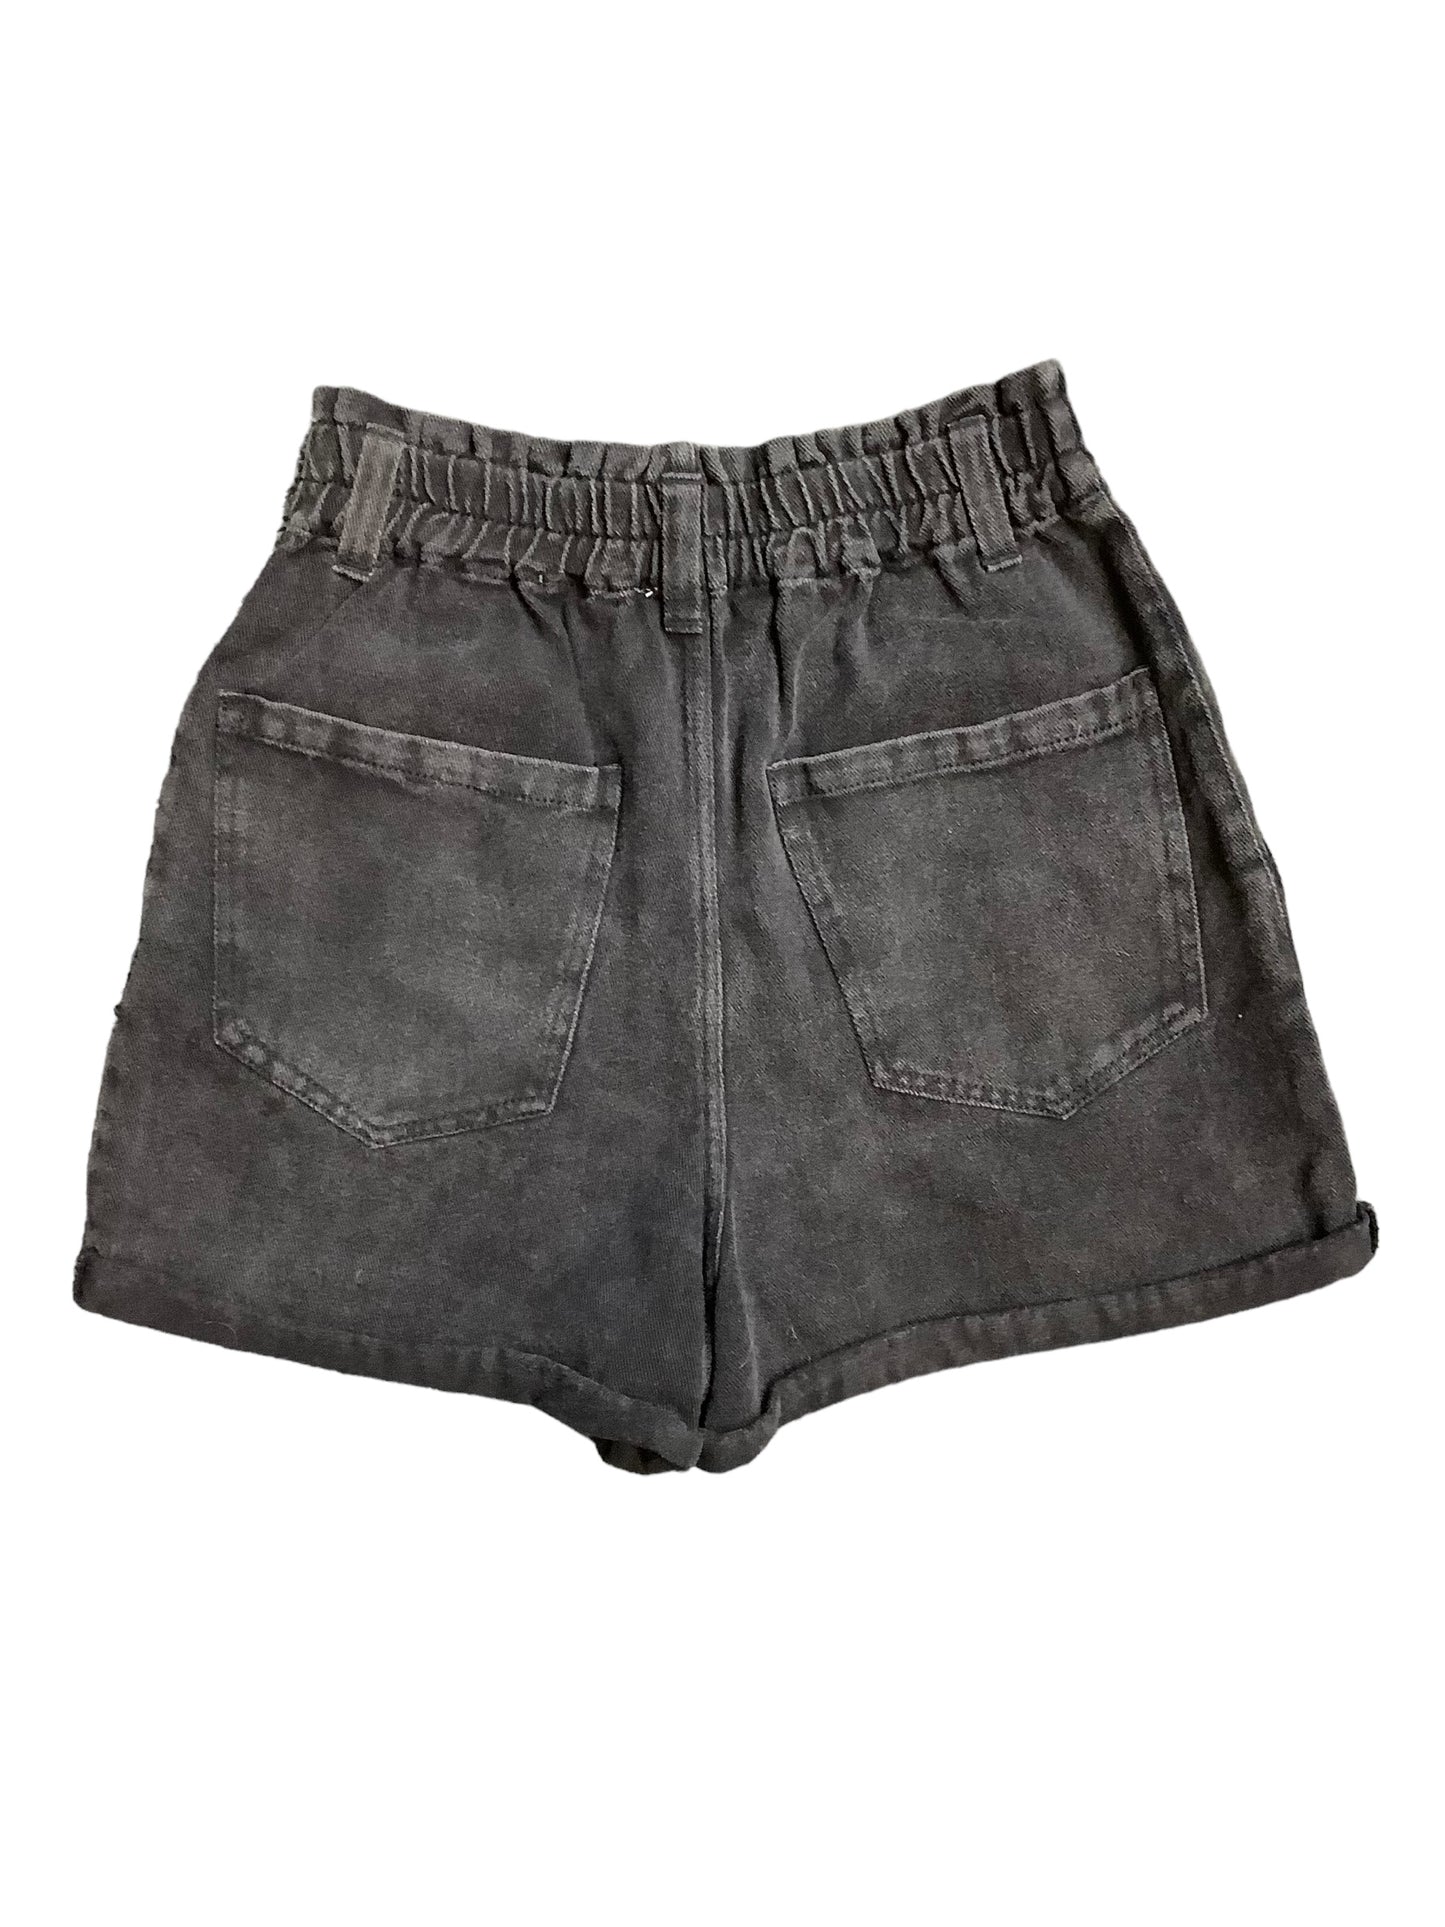 Shorts By Clothes Mentor Size S